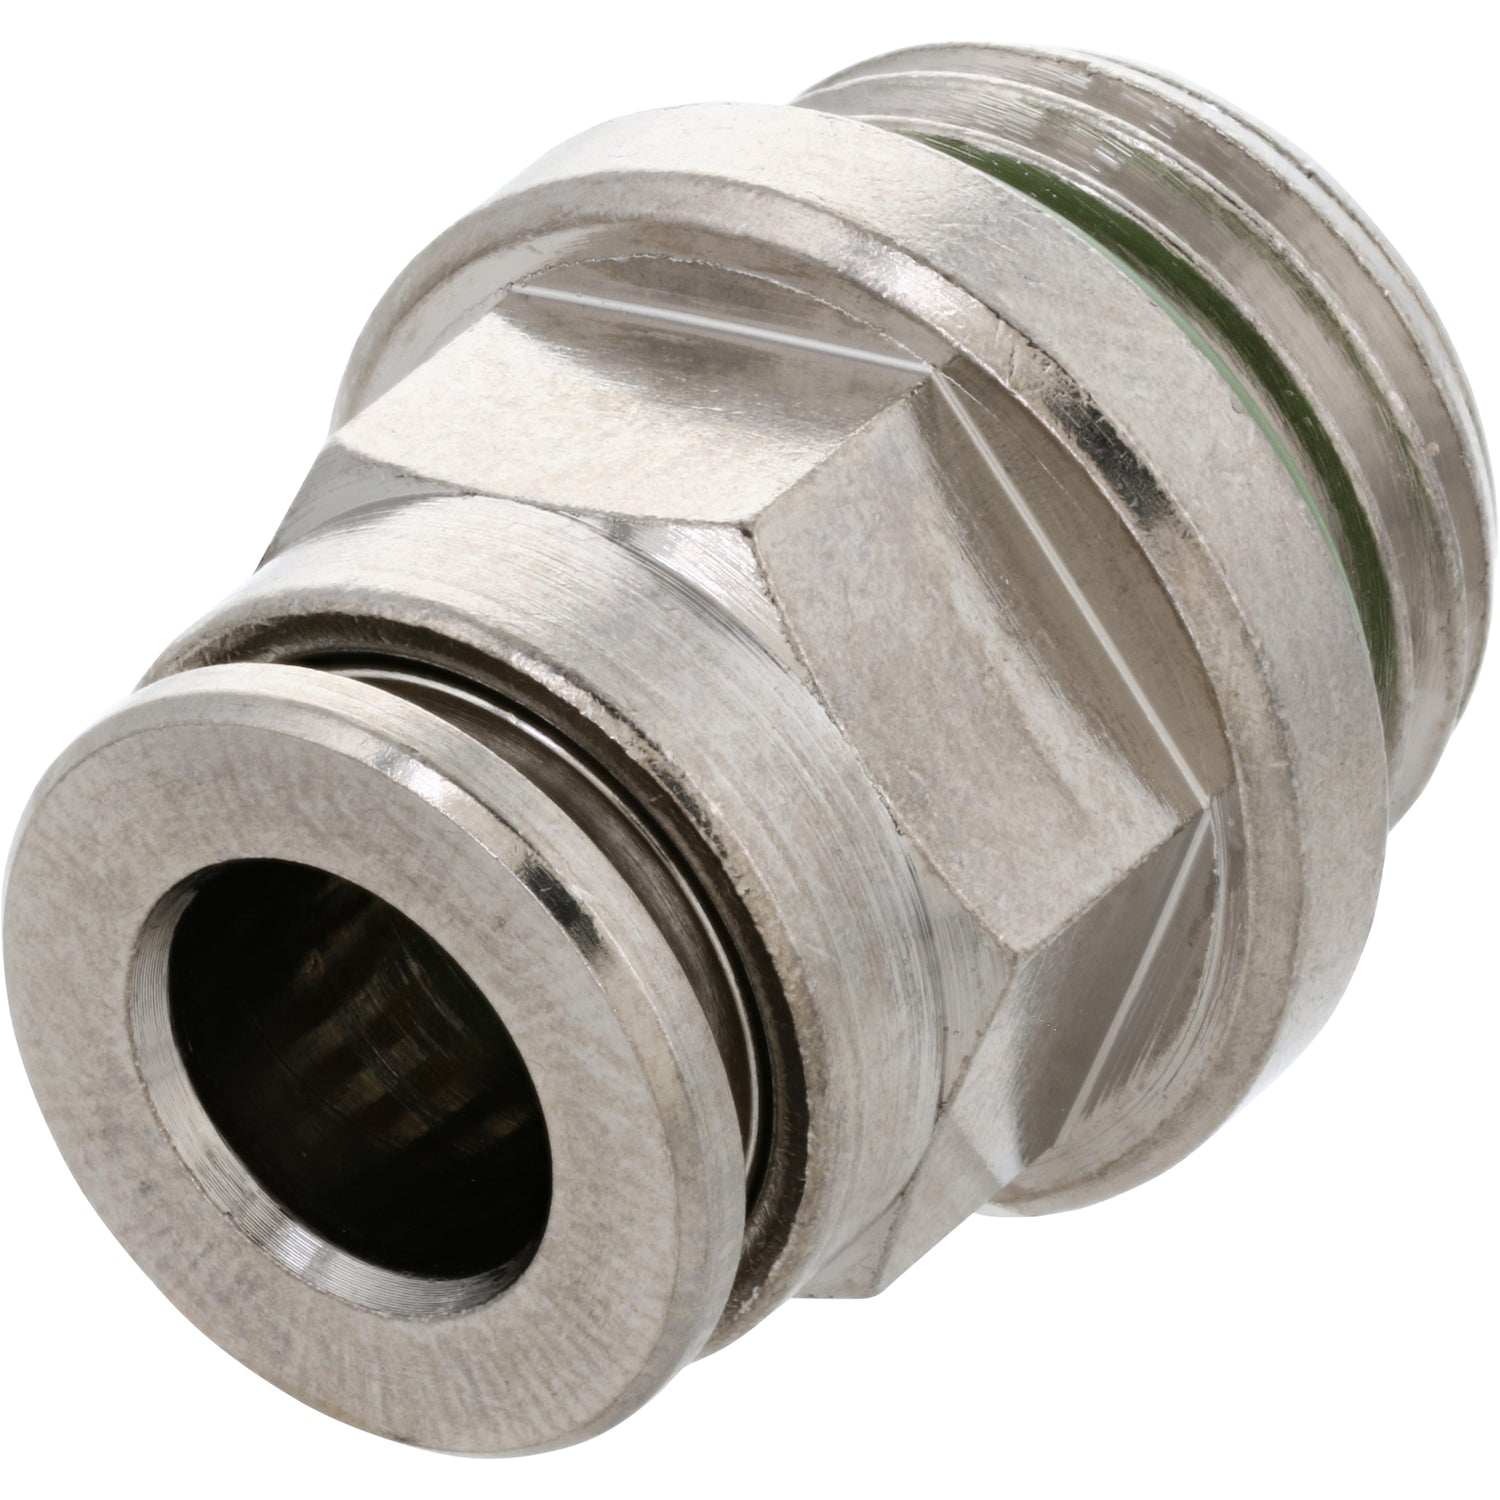 Nickel-Plated push-in fitting with push collar and threads. Part shown on white background. 